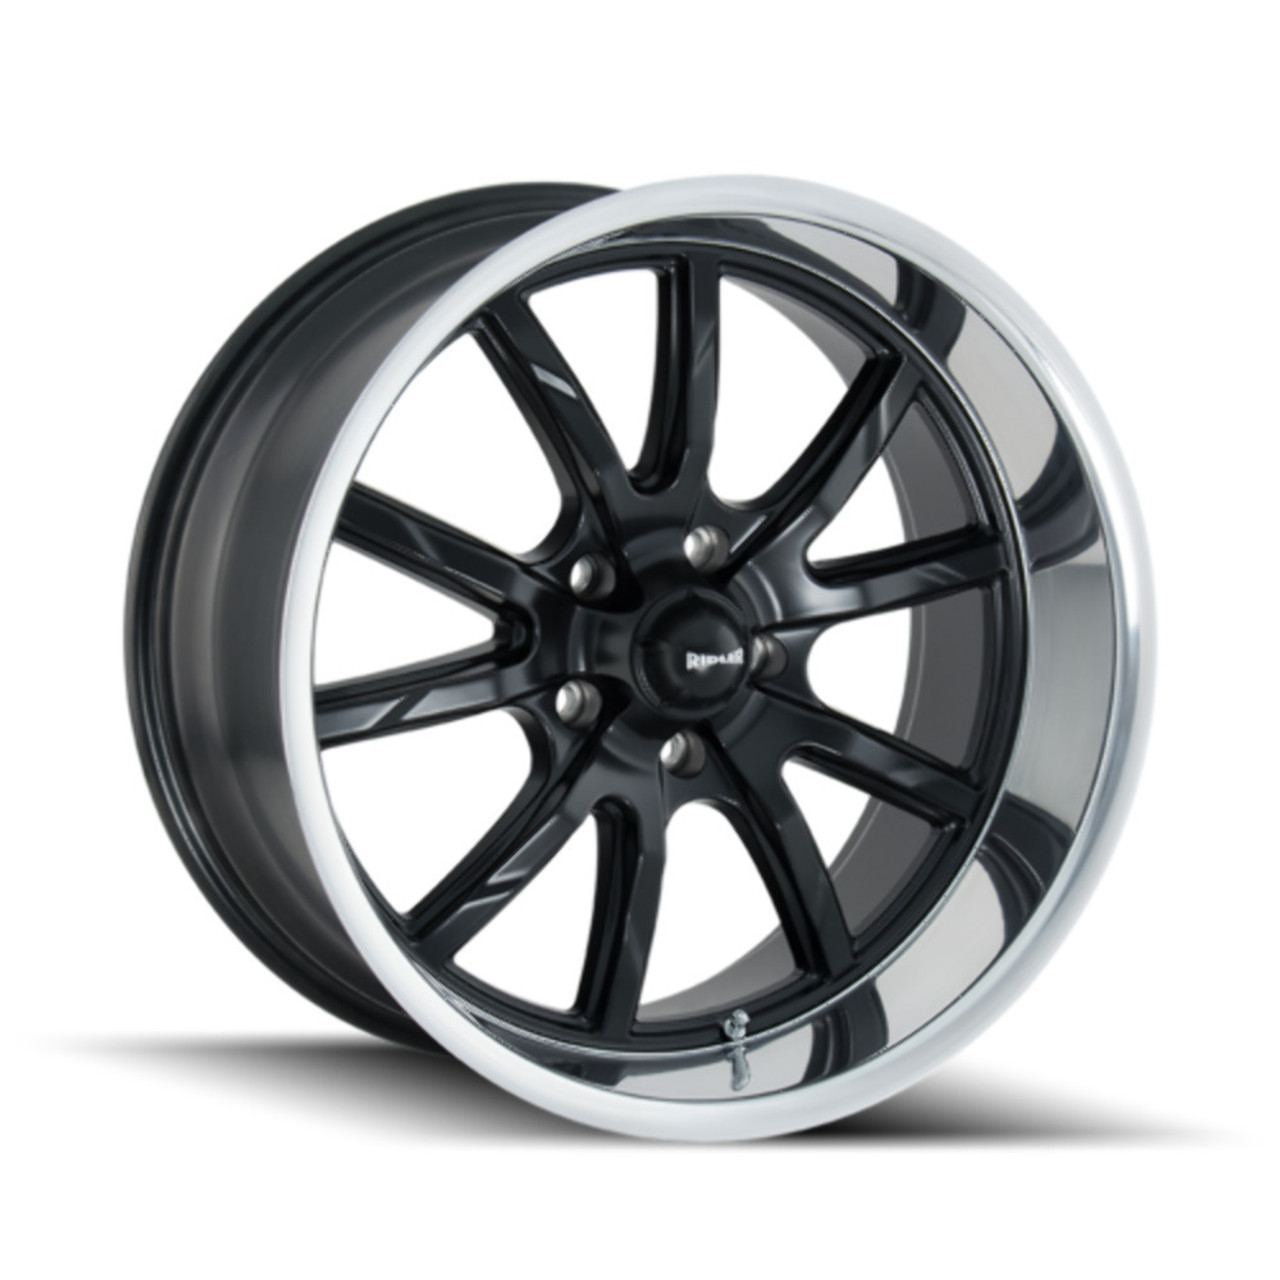 17" Ridler 650 17x8 Matte Black Polished Lip 5x5 Wheel 0mm For Jeep Chevy GMC